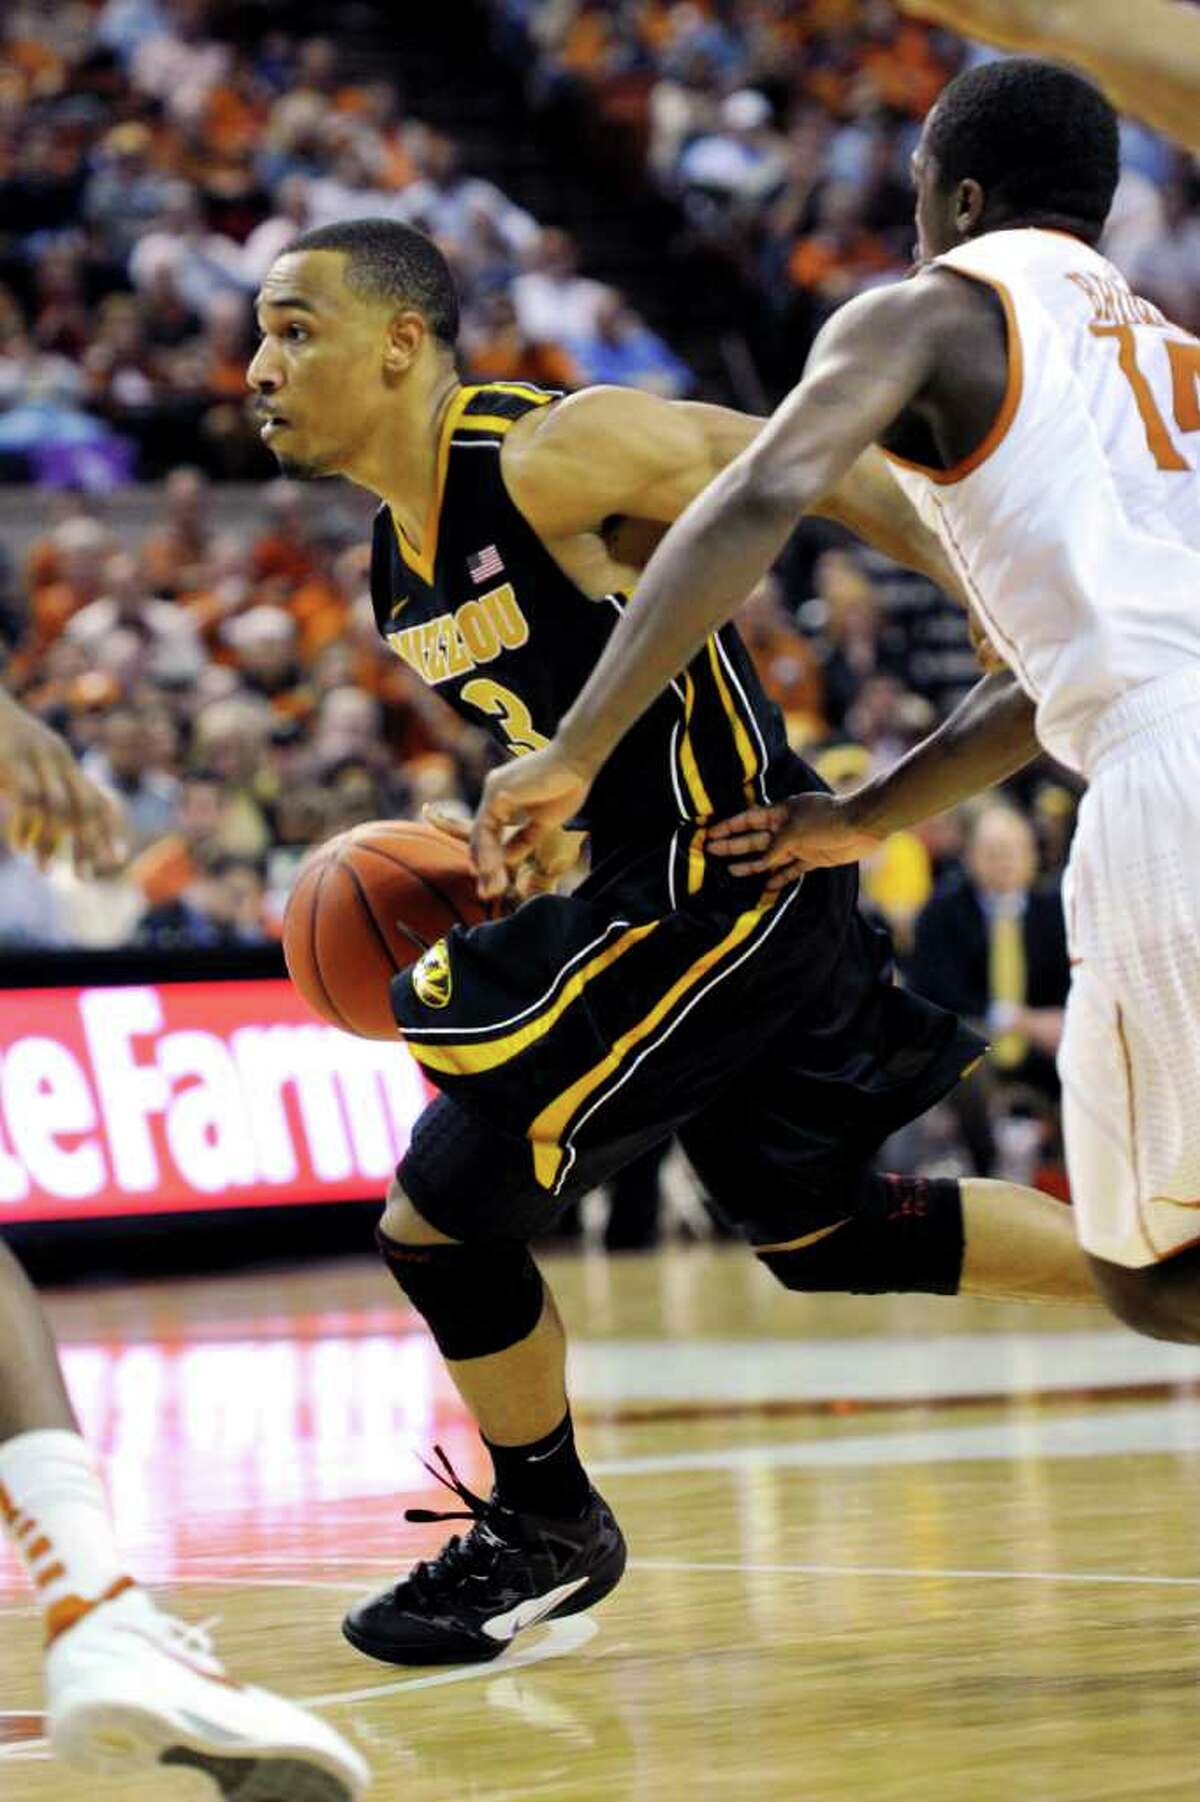 Missouri guard Matt Pressey (3) goes to the basket against Texas guard J'Covan Brown (14) during the first half of an NCAA college basketball game, Monday, Jan. 30, 2012, in Austin, Texas.